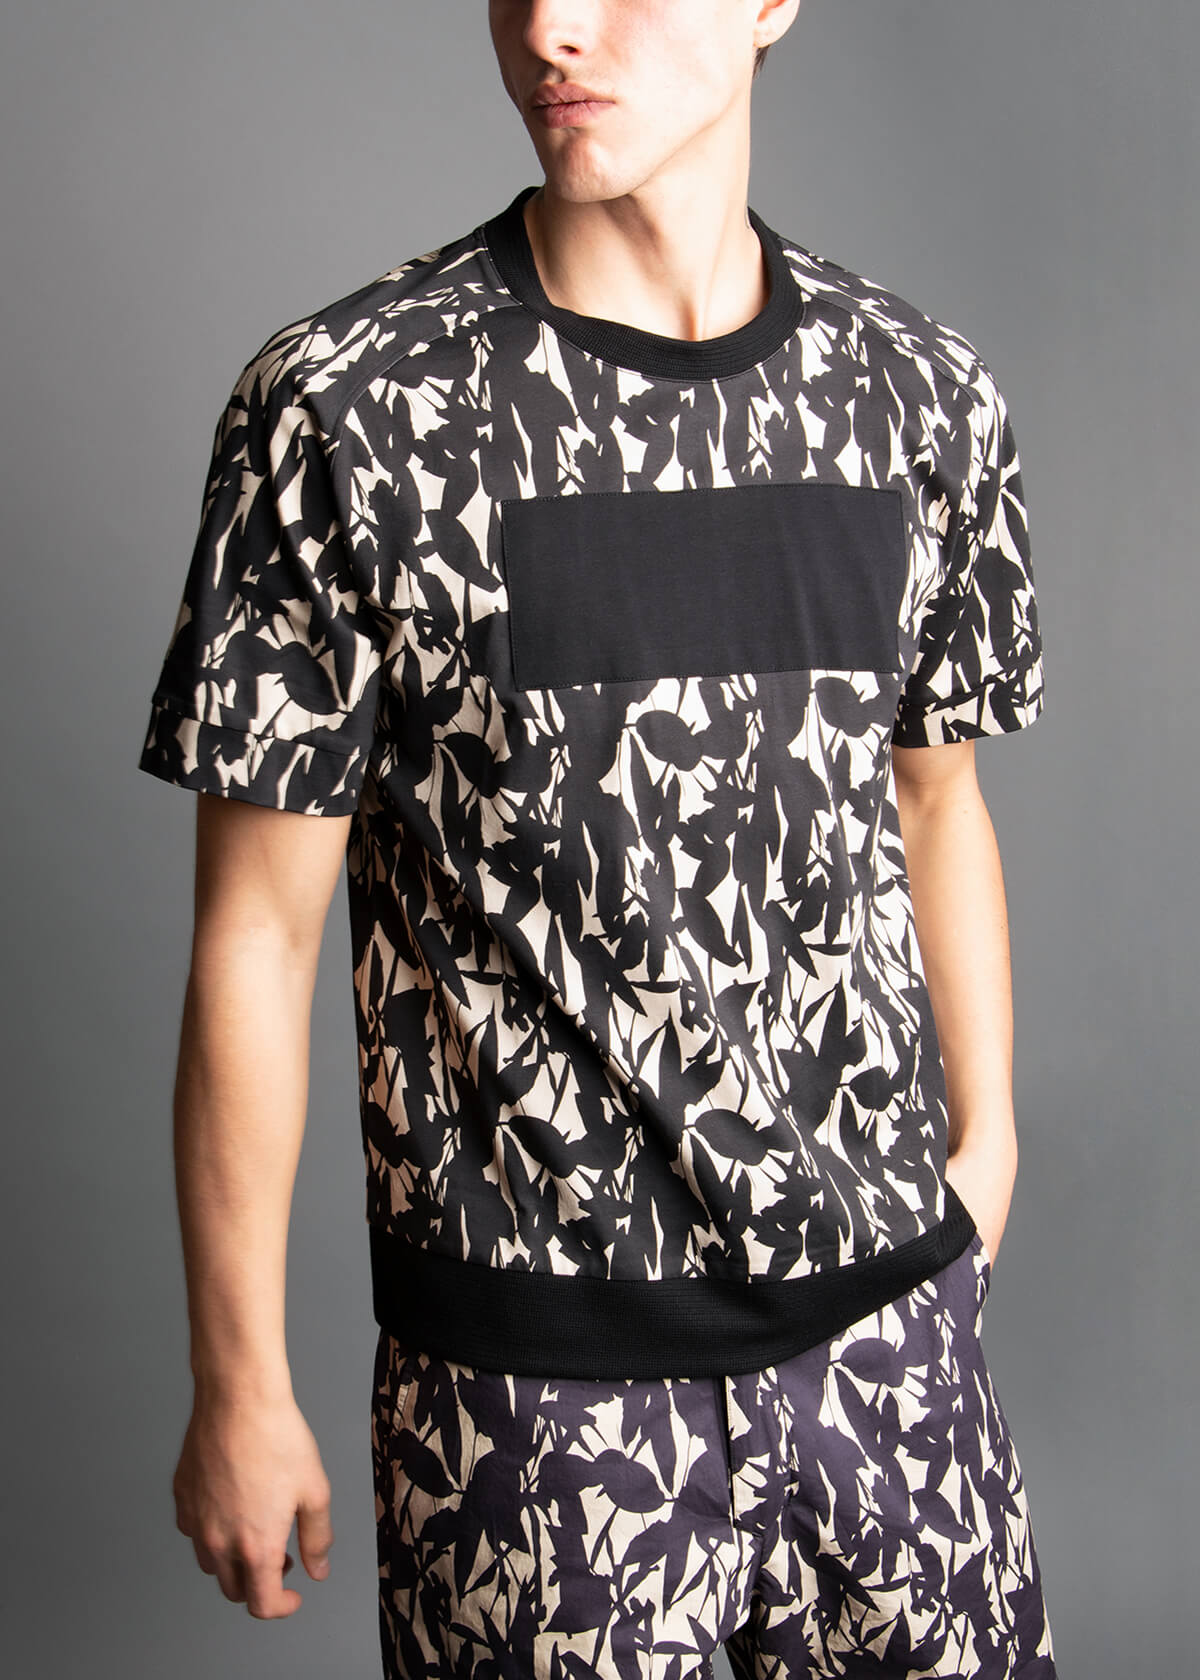 men's t-shirt with a abstract flower print